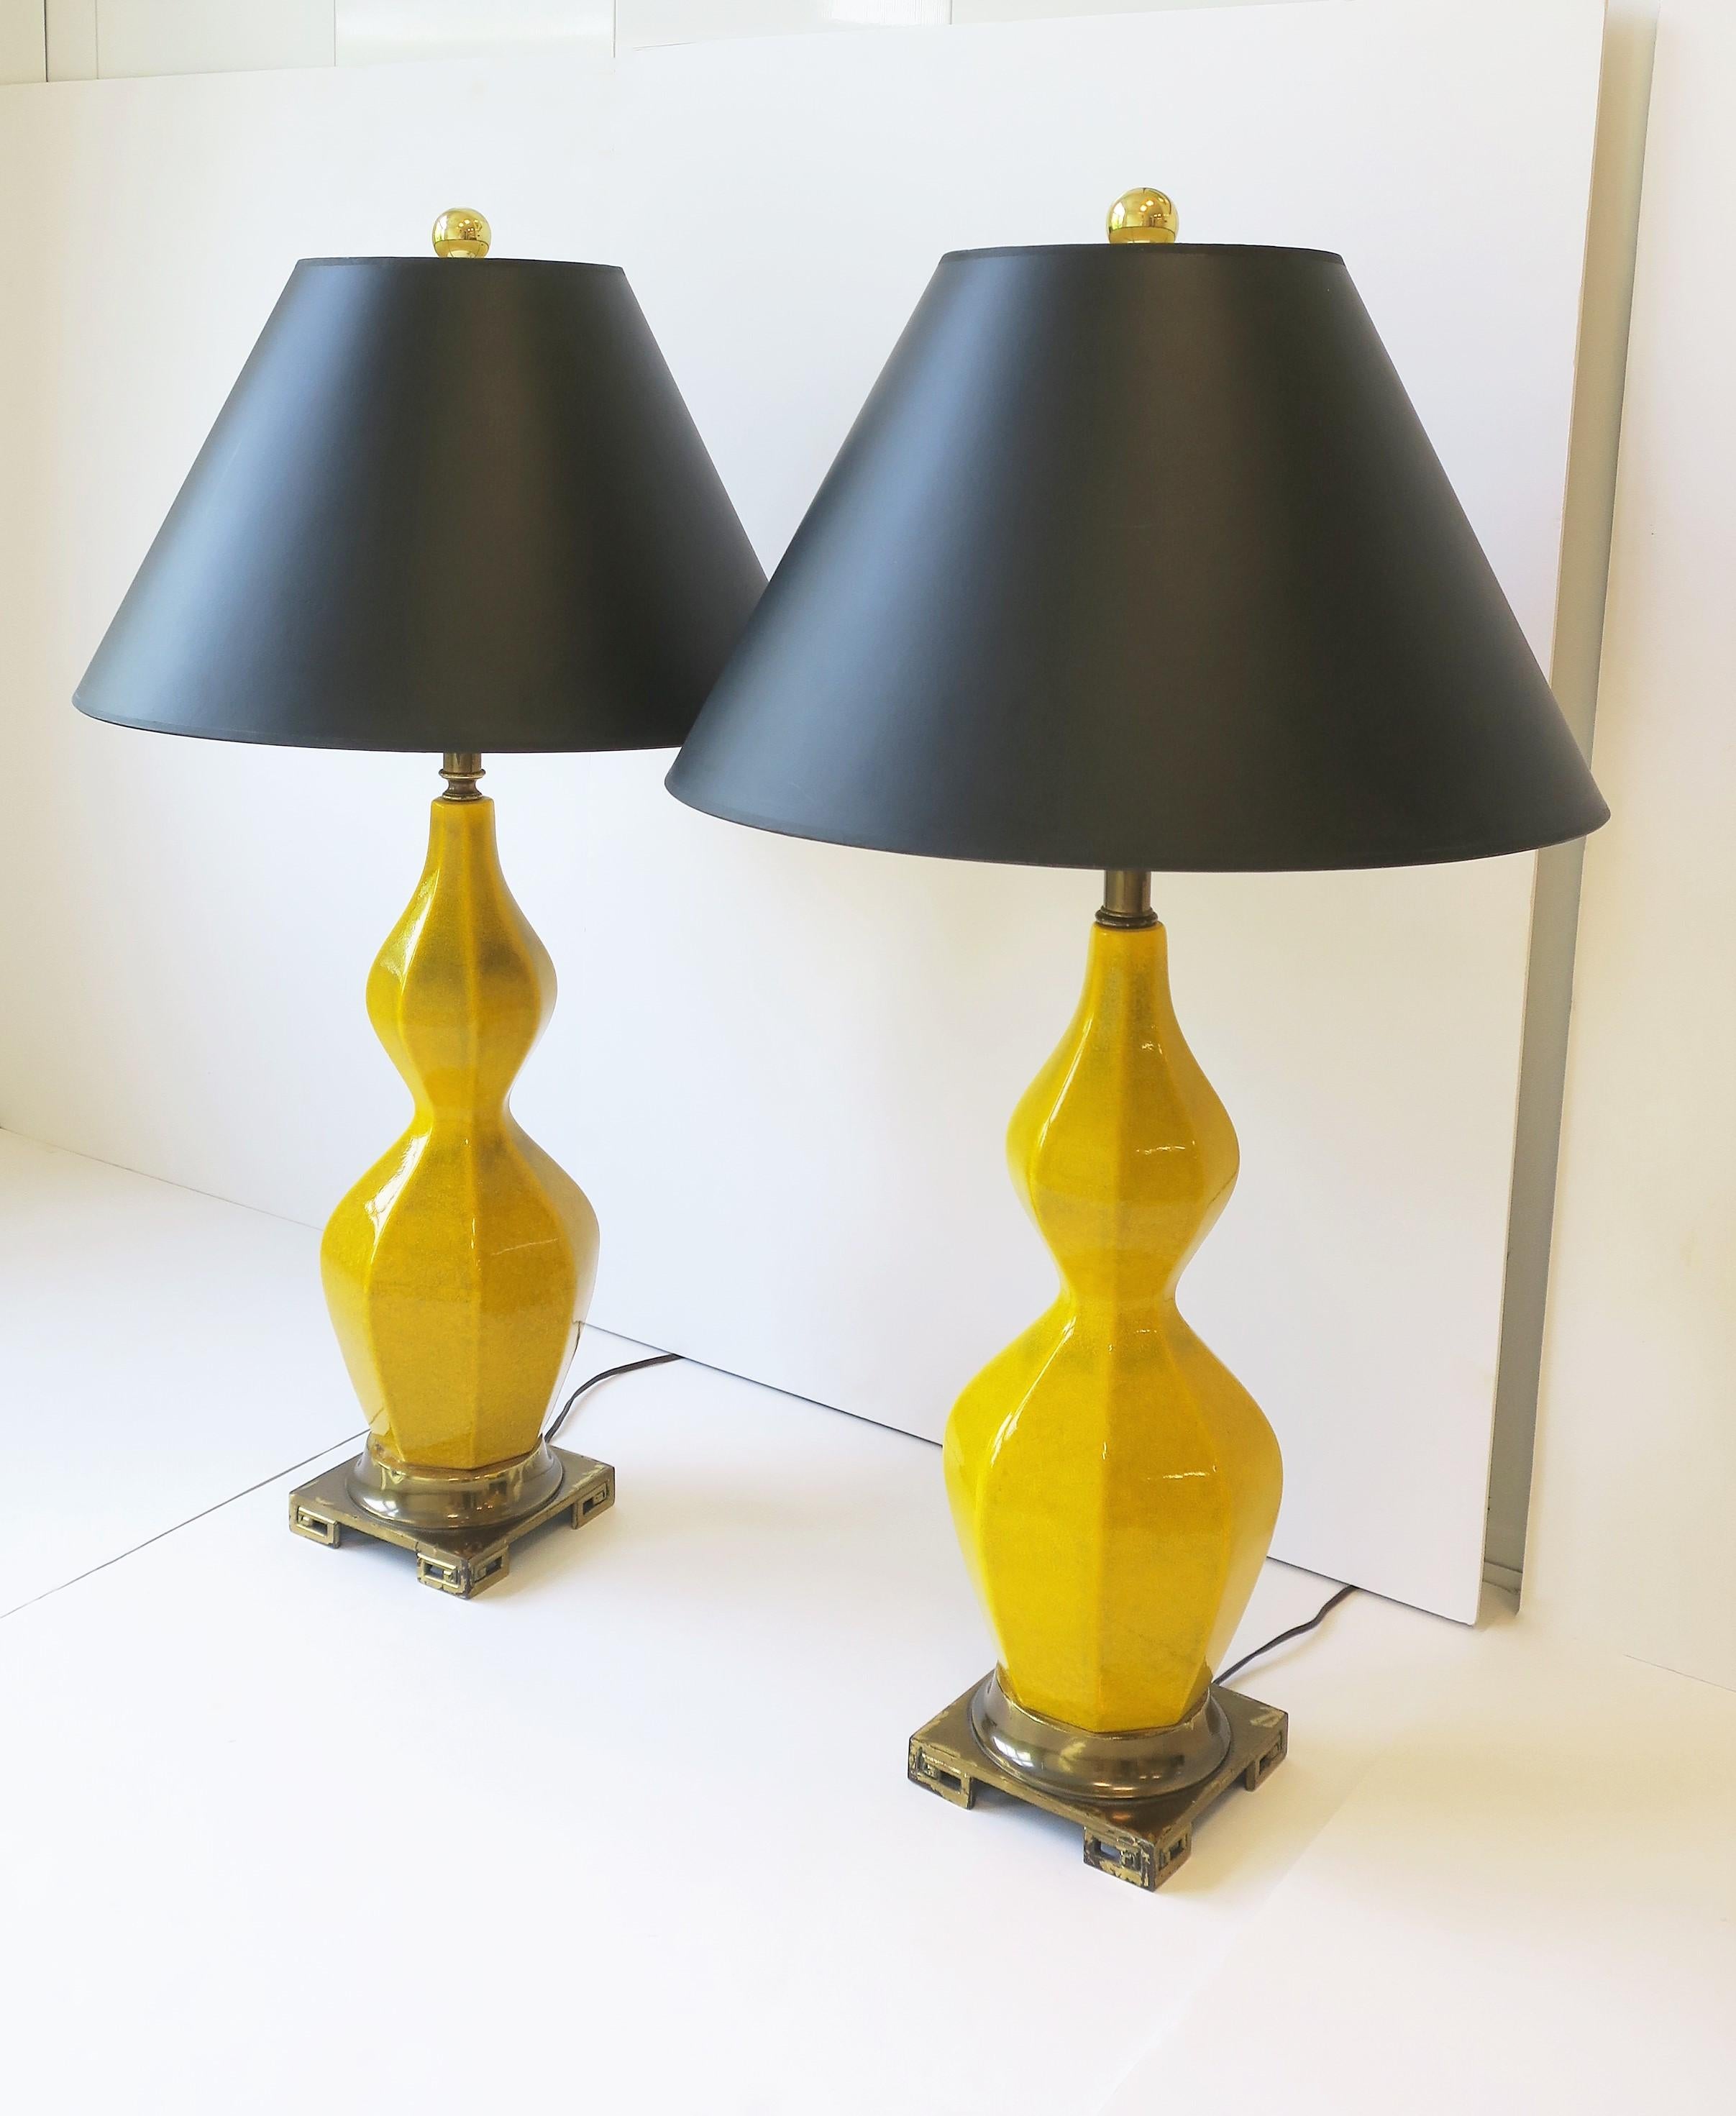 A pair of yellow ceramic table lamps with brass bases, Midcentury Modern period, circa mid-20th century, 1960s. Lamps have an hourglass and octagonal shape with a bras Greek-key like design base. In fine working order. 

Dimensions:
26.5